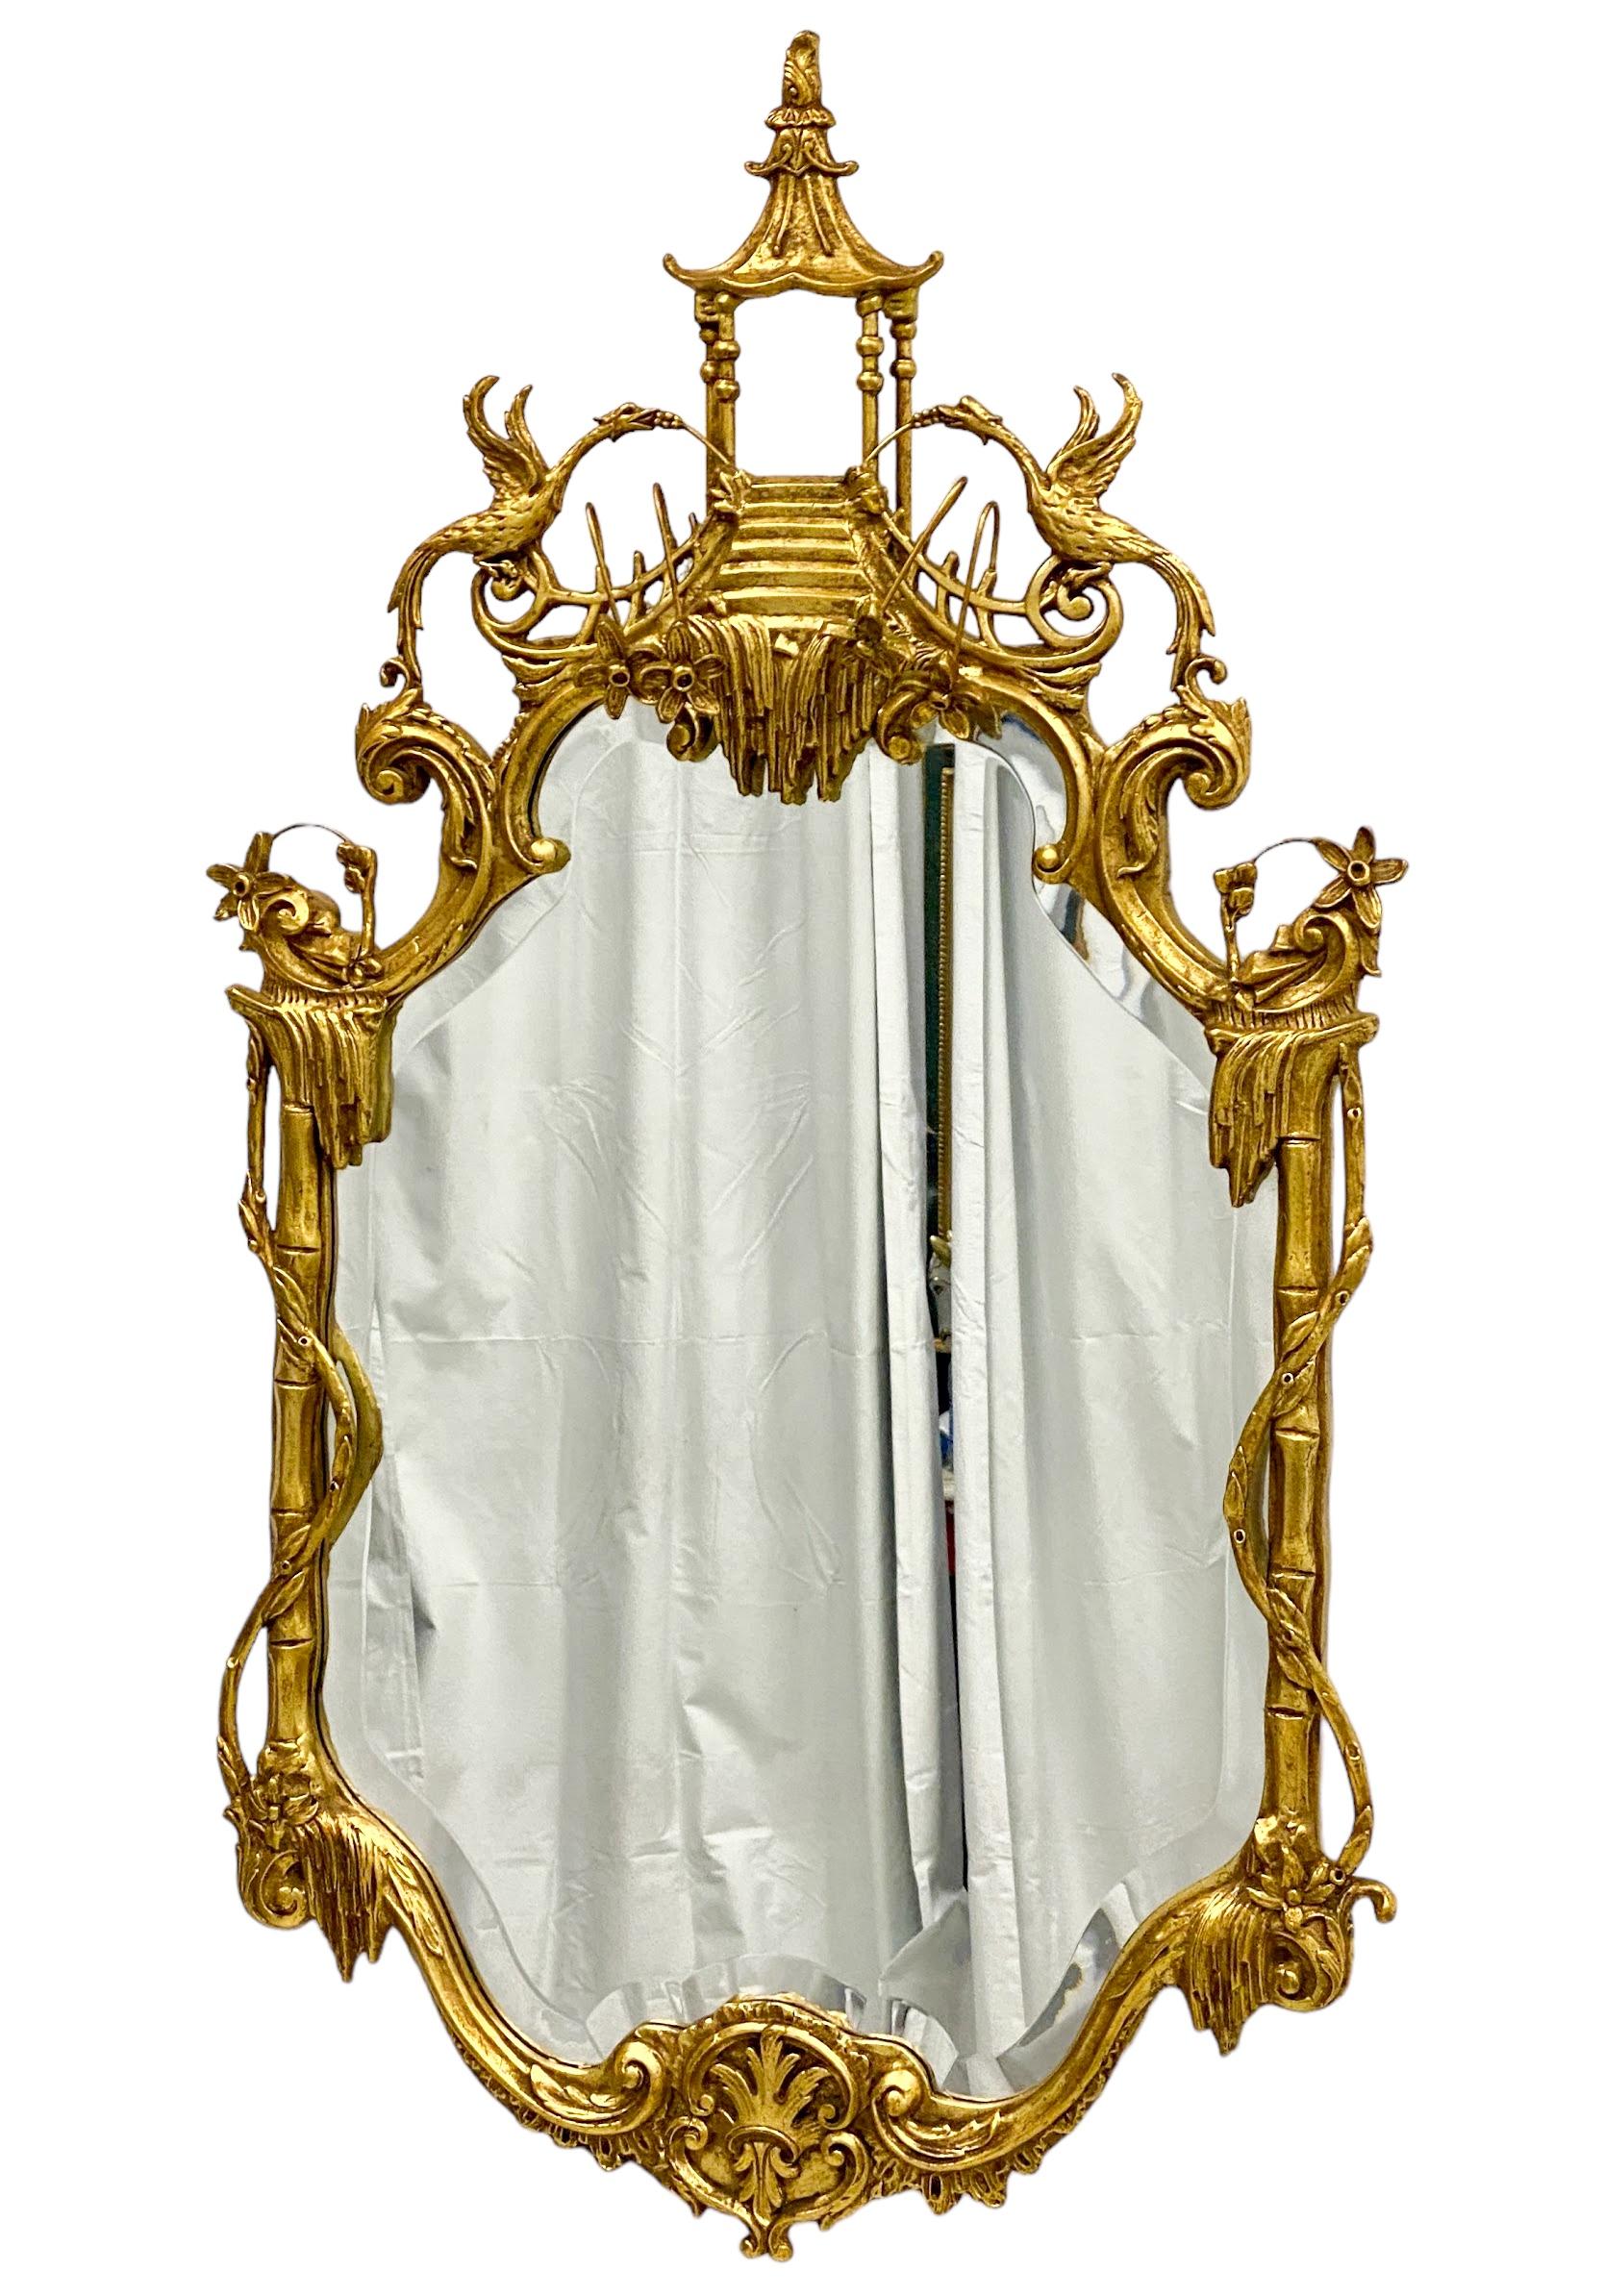 20th Century Italian Carved Giltwood Chinese Chippendale Style Mirror Att. Friedman Bros.